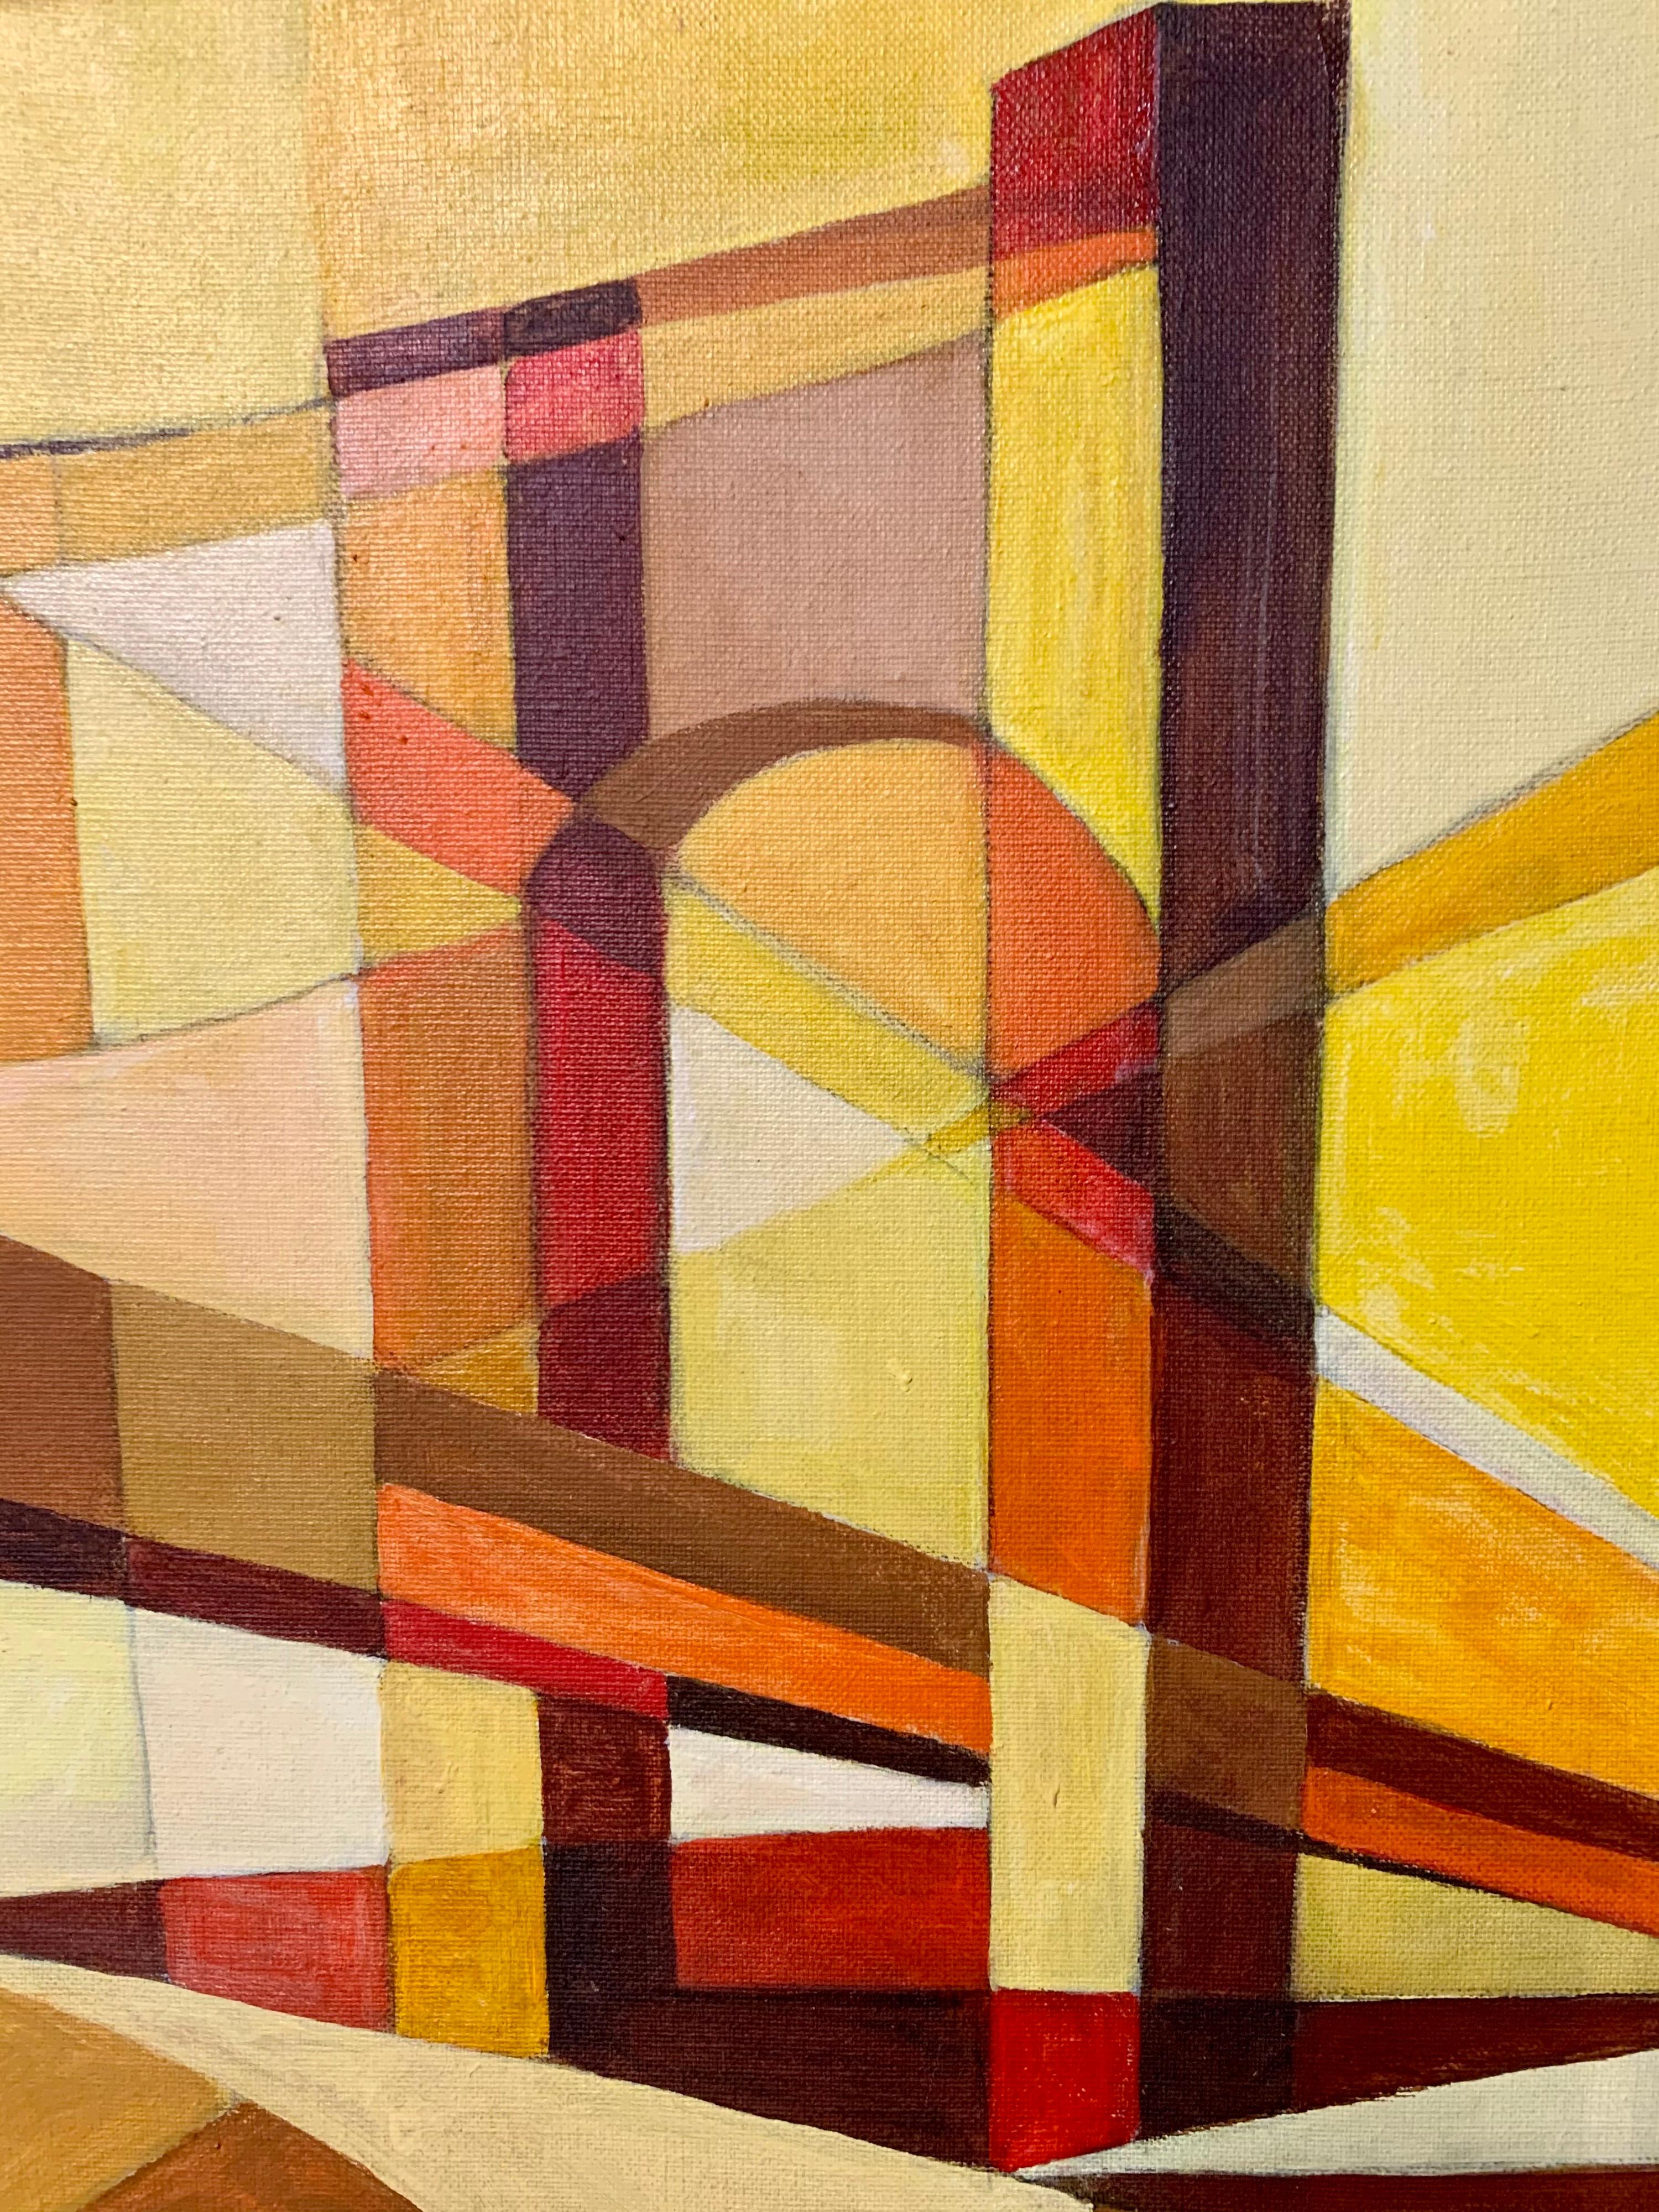 Original midcentury painting of the Brooklyn Bridge utilizing geometric shapes and bright colors of orange, brown and yellow. Signed lower right, B. Farian.